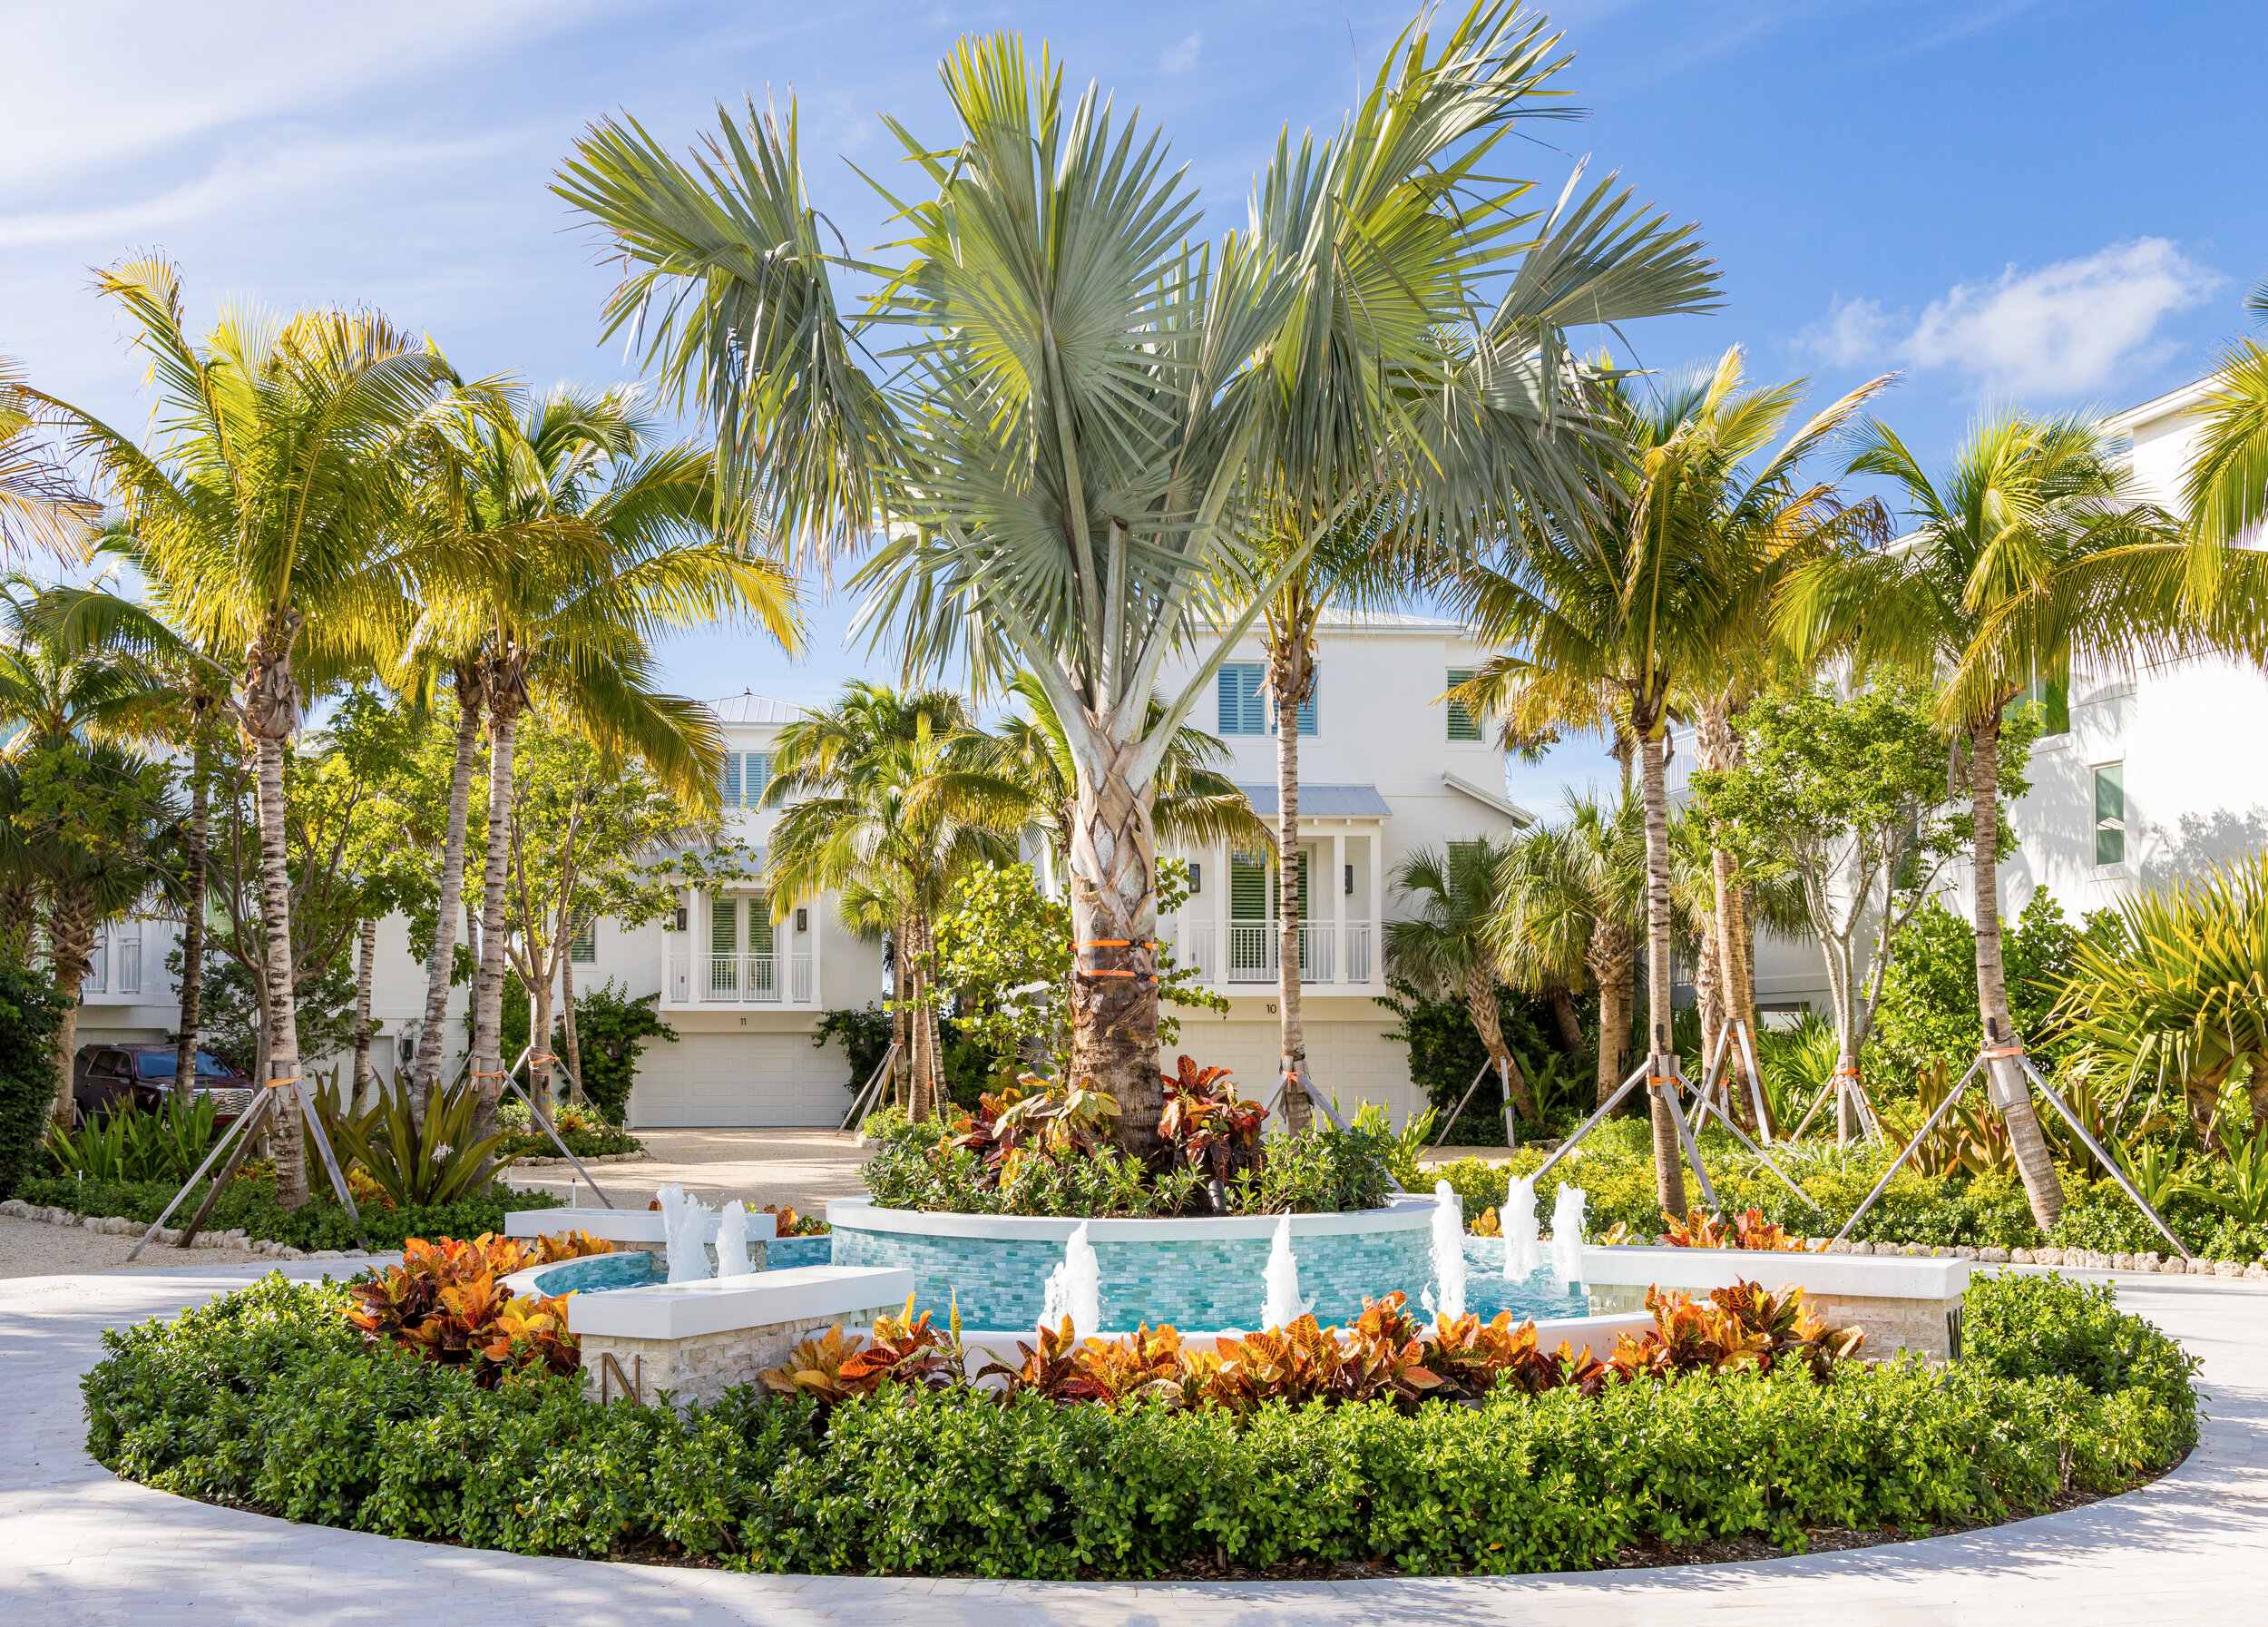  Palm trees, gardens, and fountain at The Islands of Islamorada’s front entrance. 